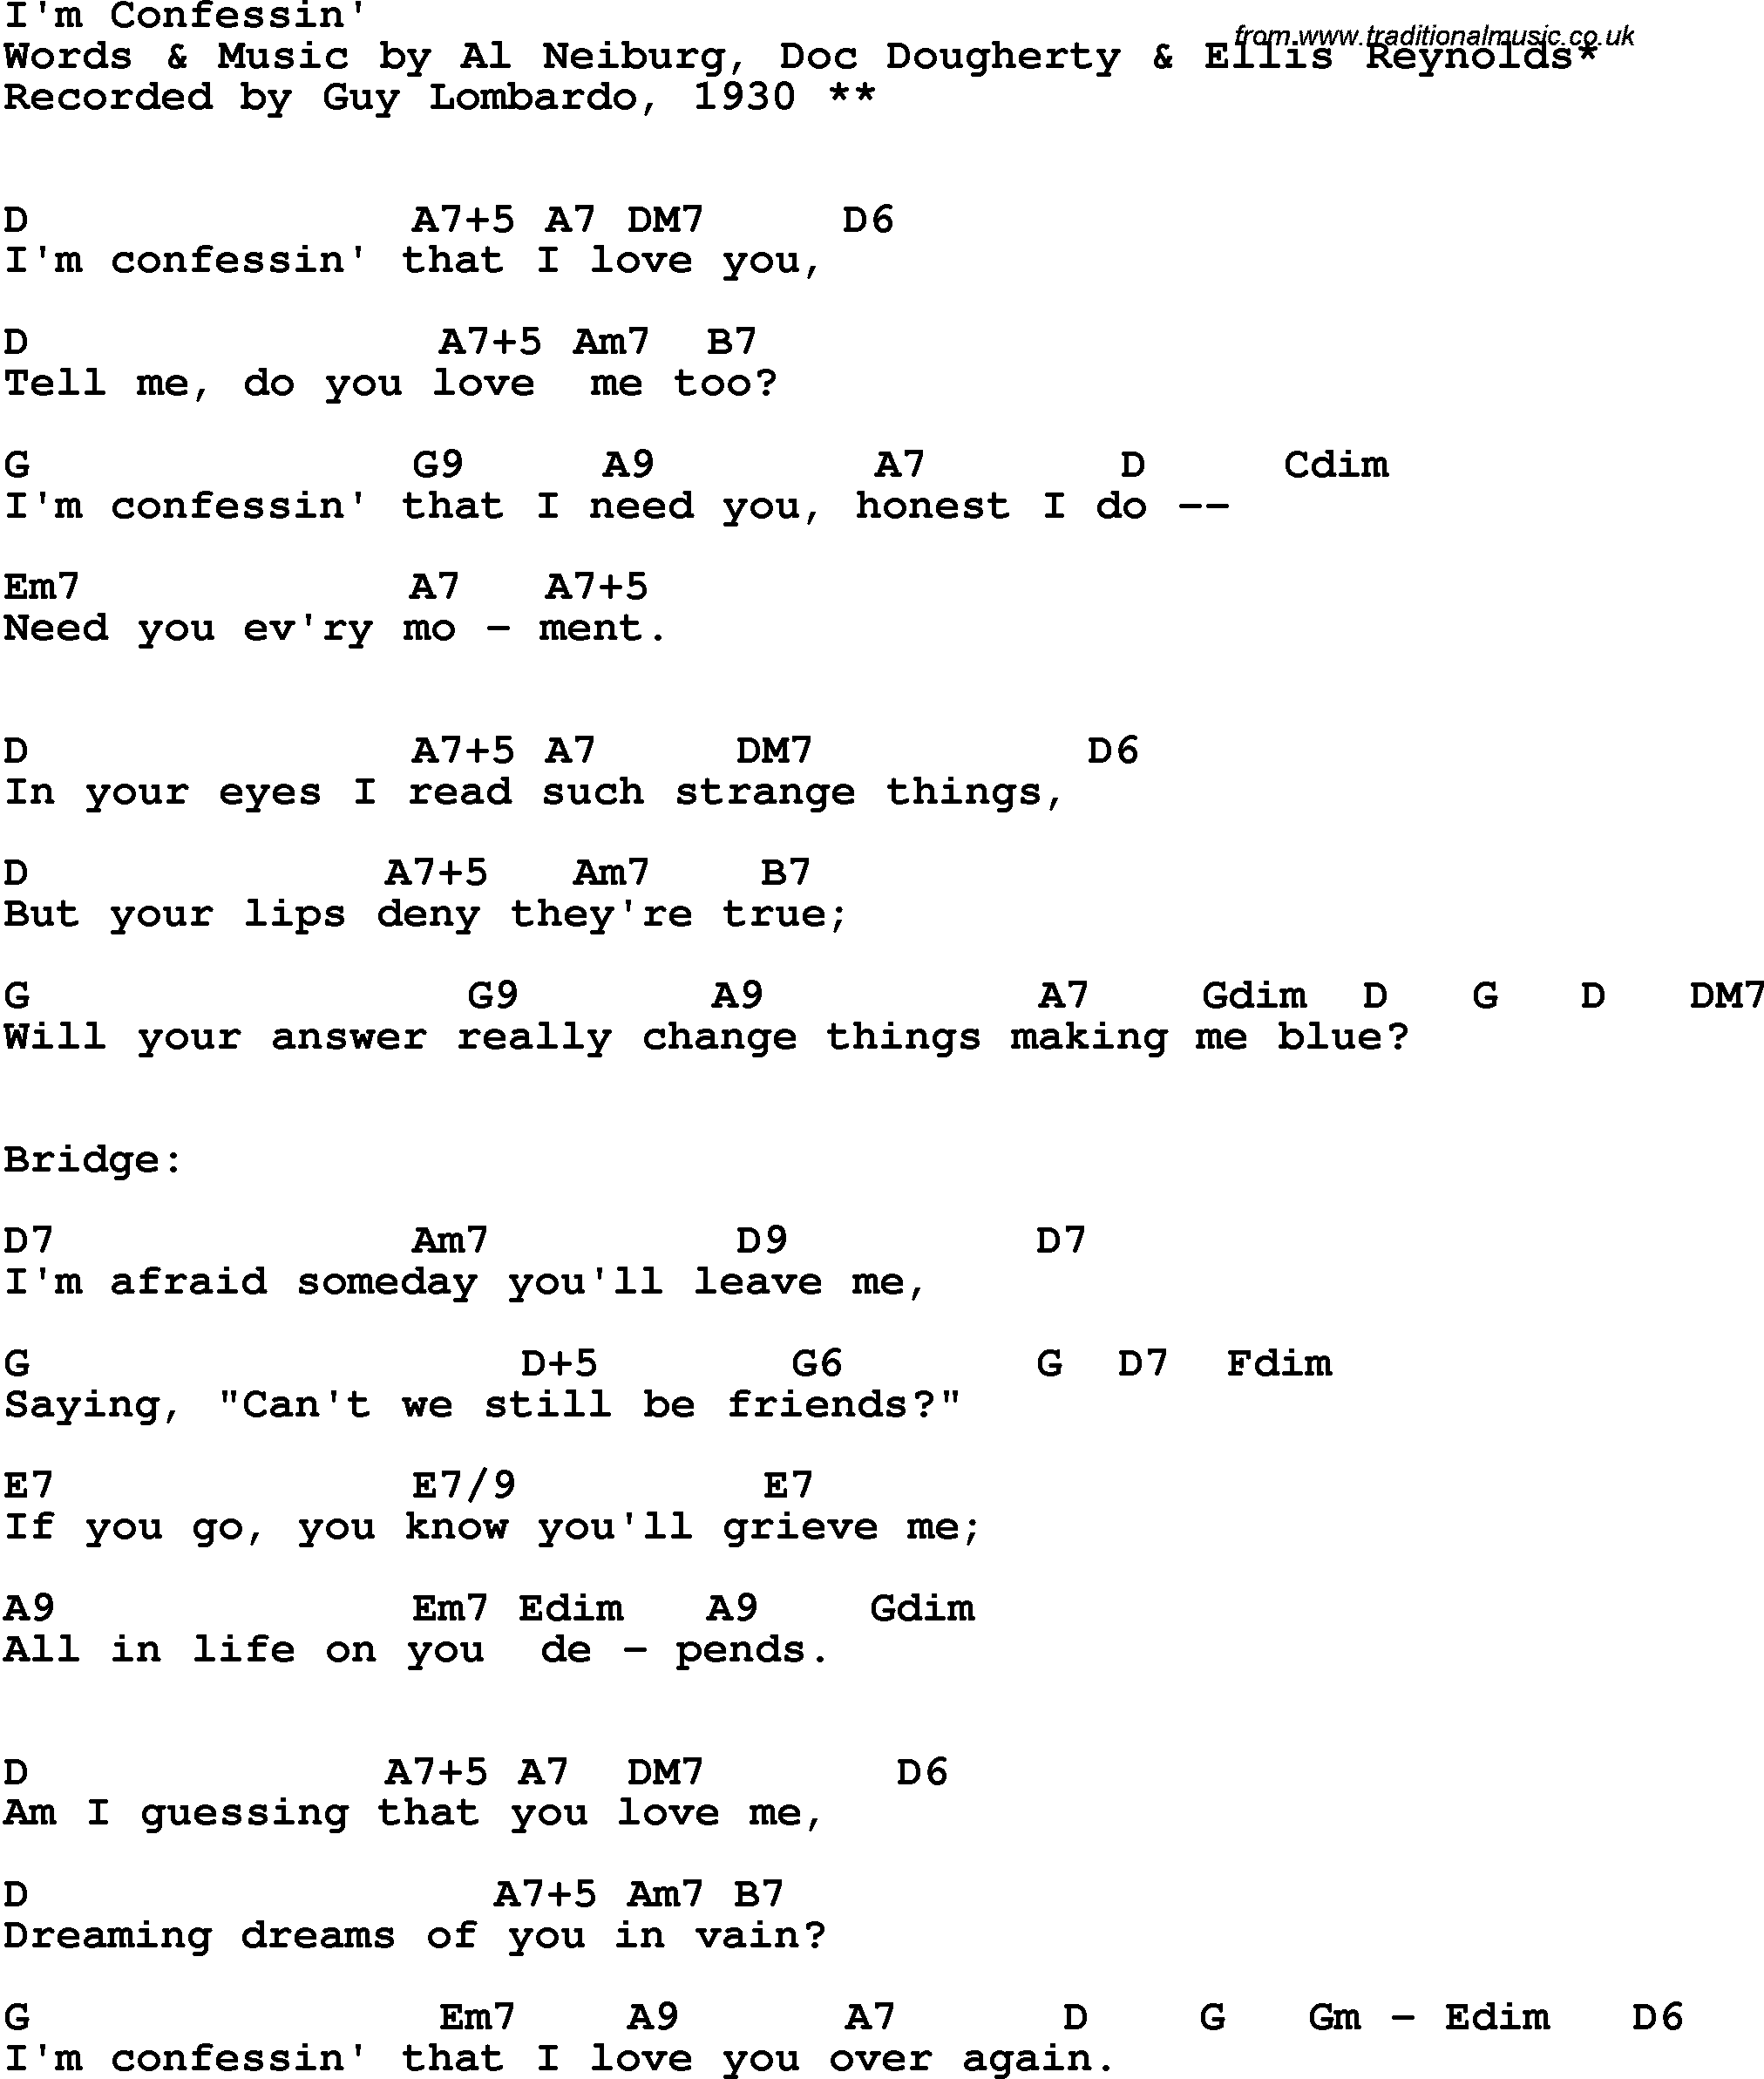 Song Lyrics with guitar chords for I'm Confessin'  - Guy Lombardo, 1930